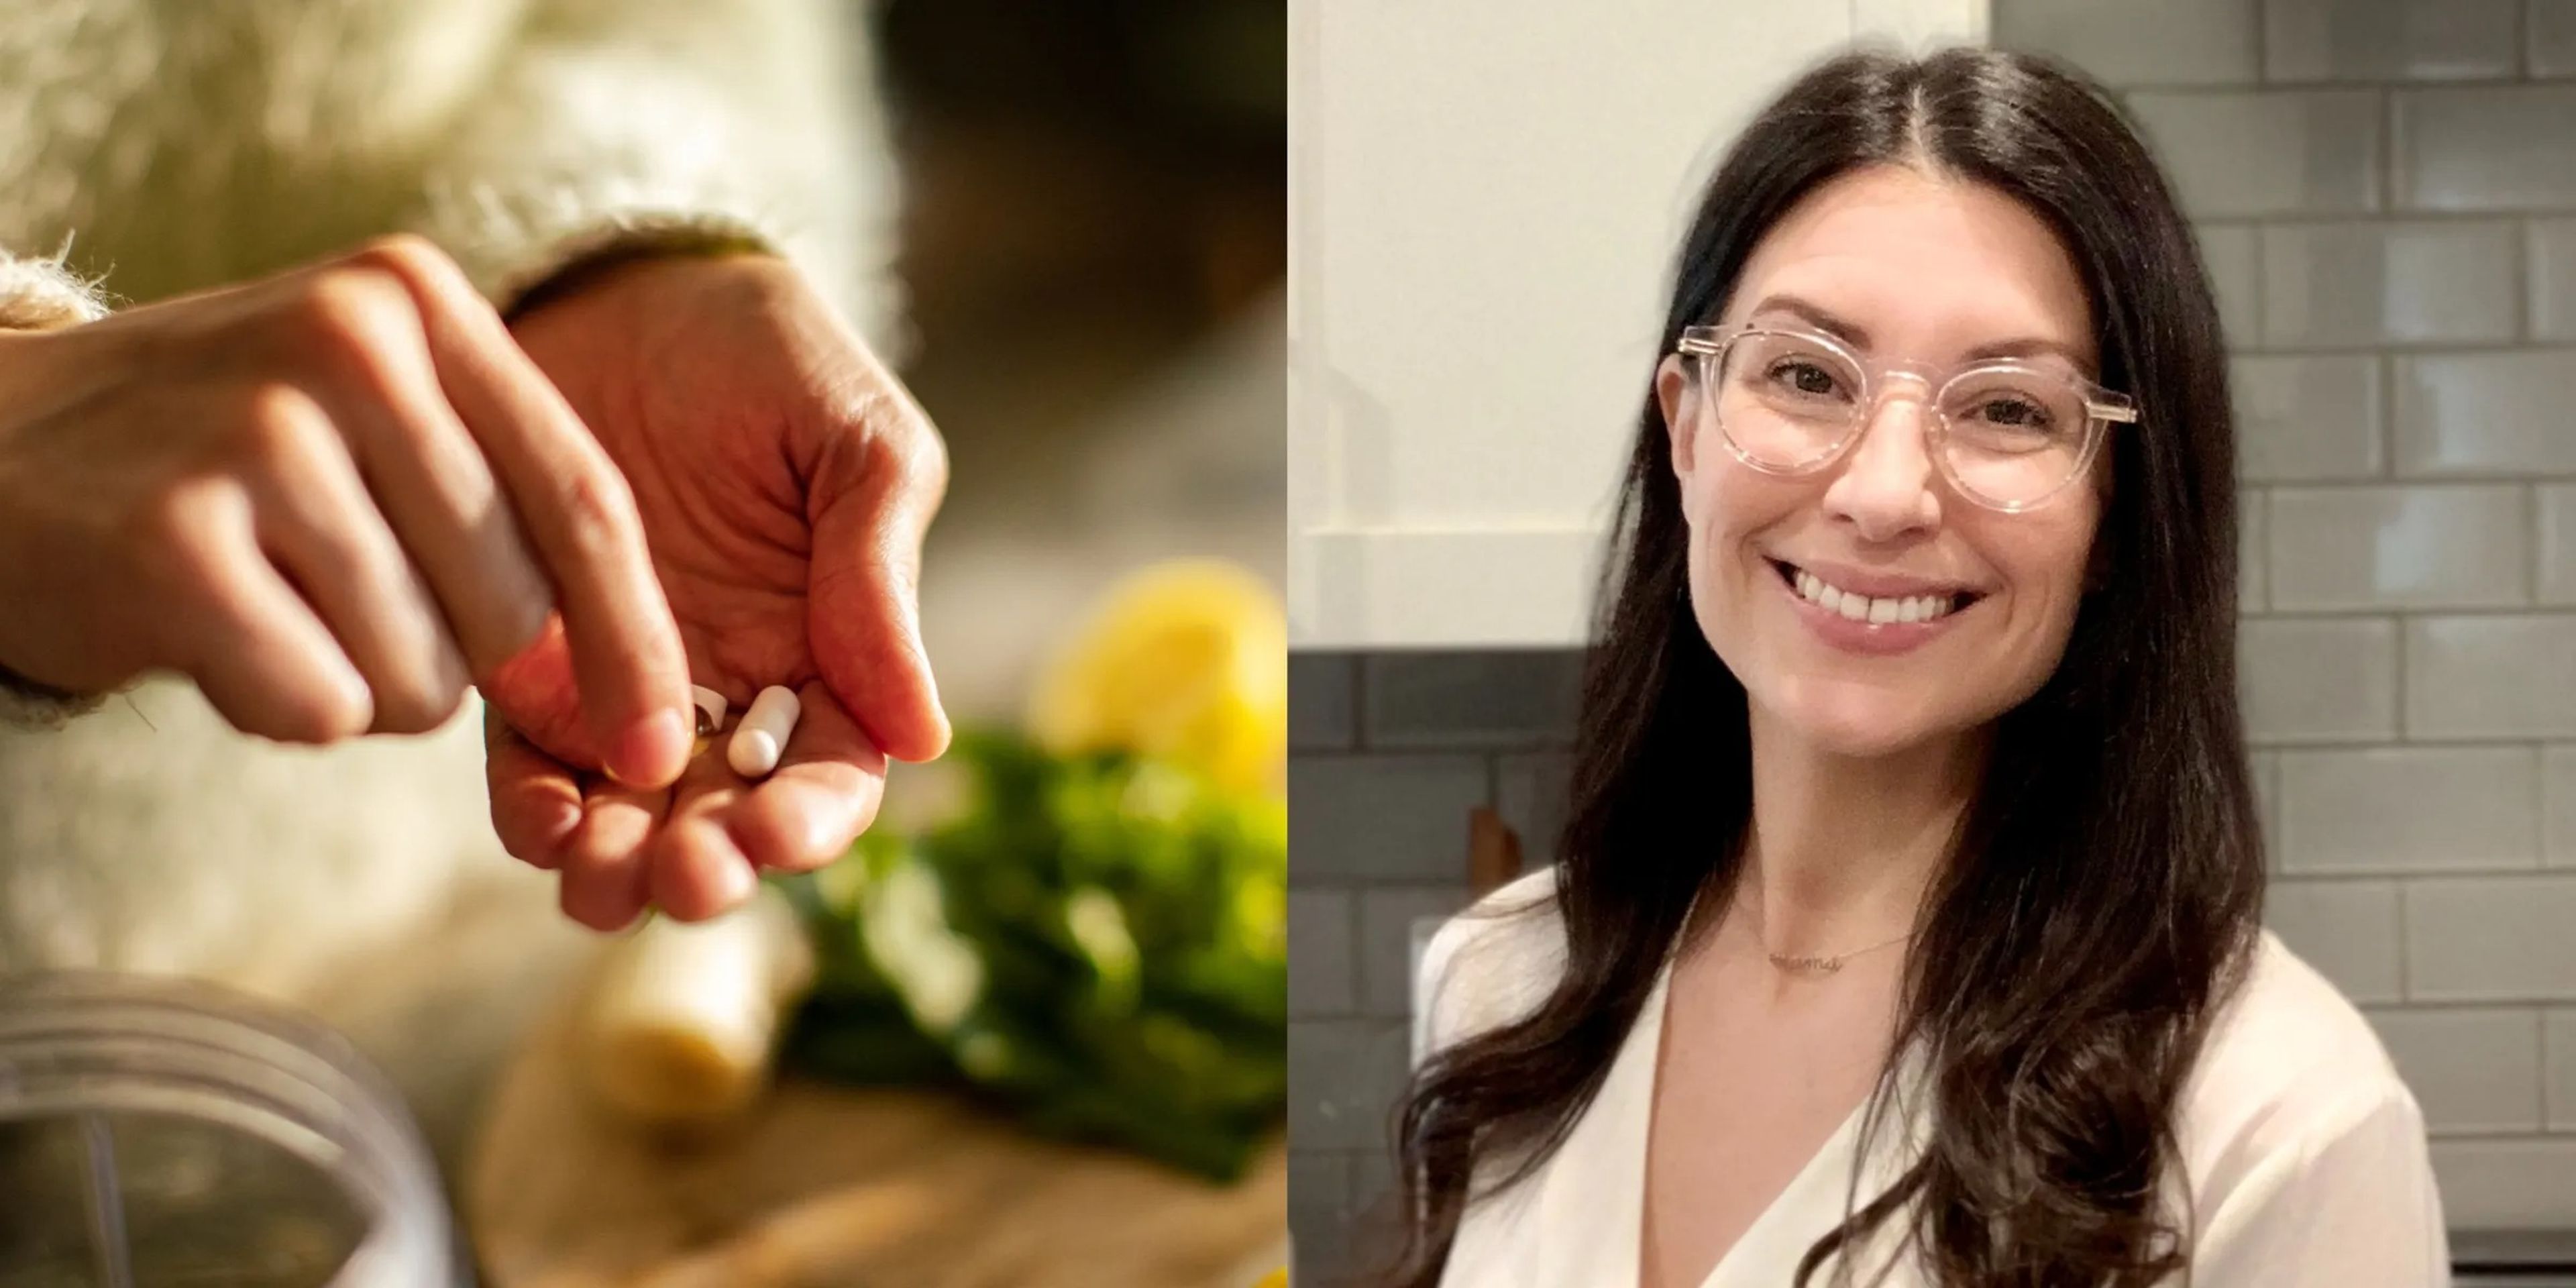 Stock image of someone holding vitamins (left) Natalie Carroll (right).